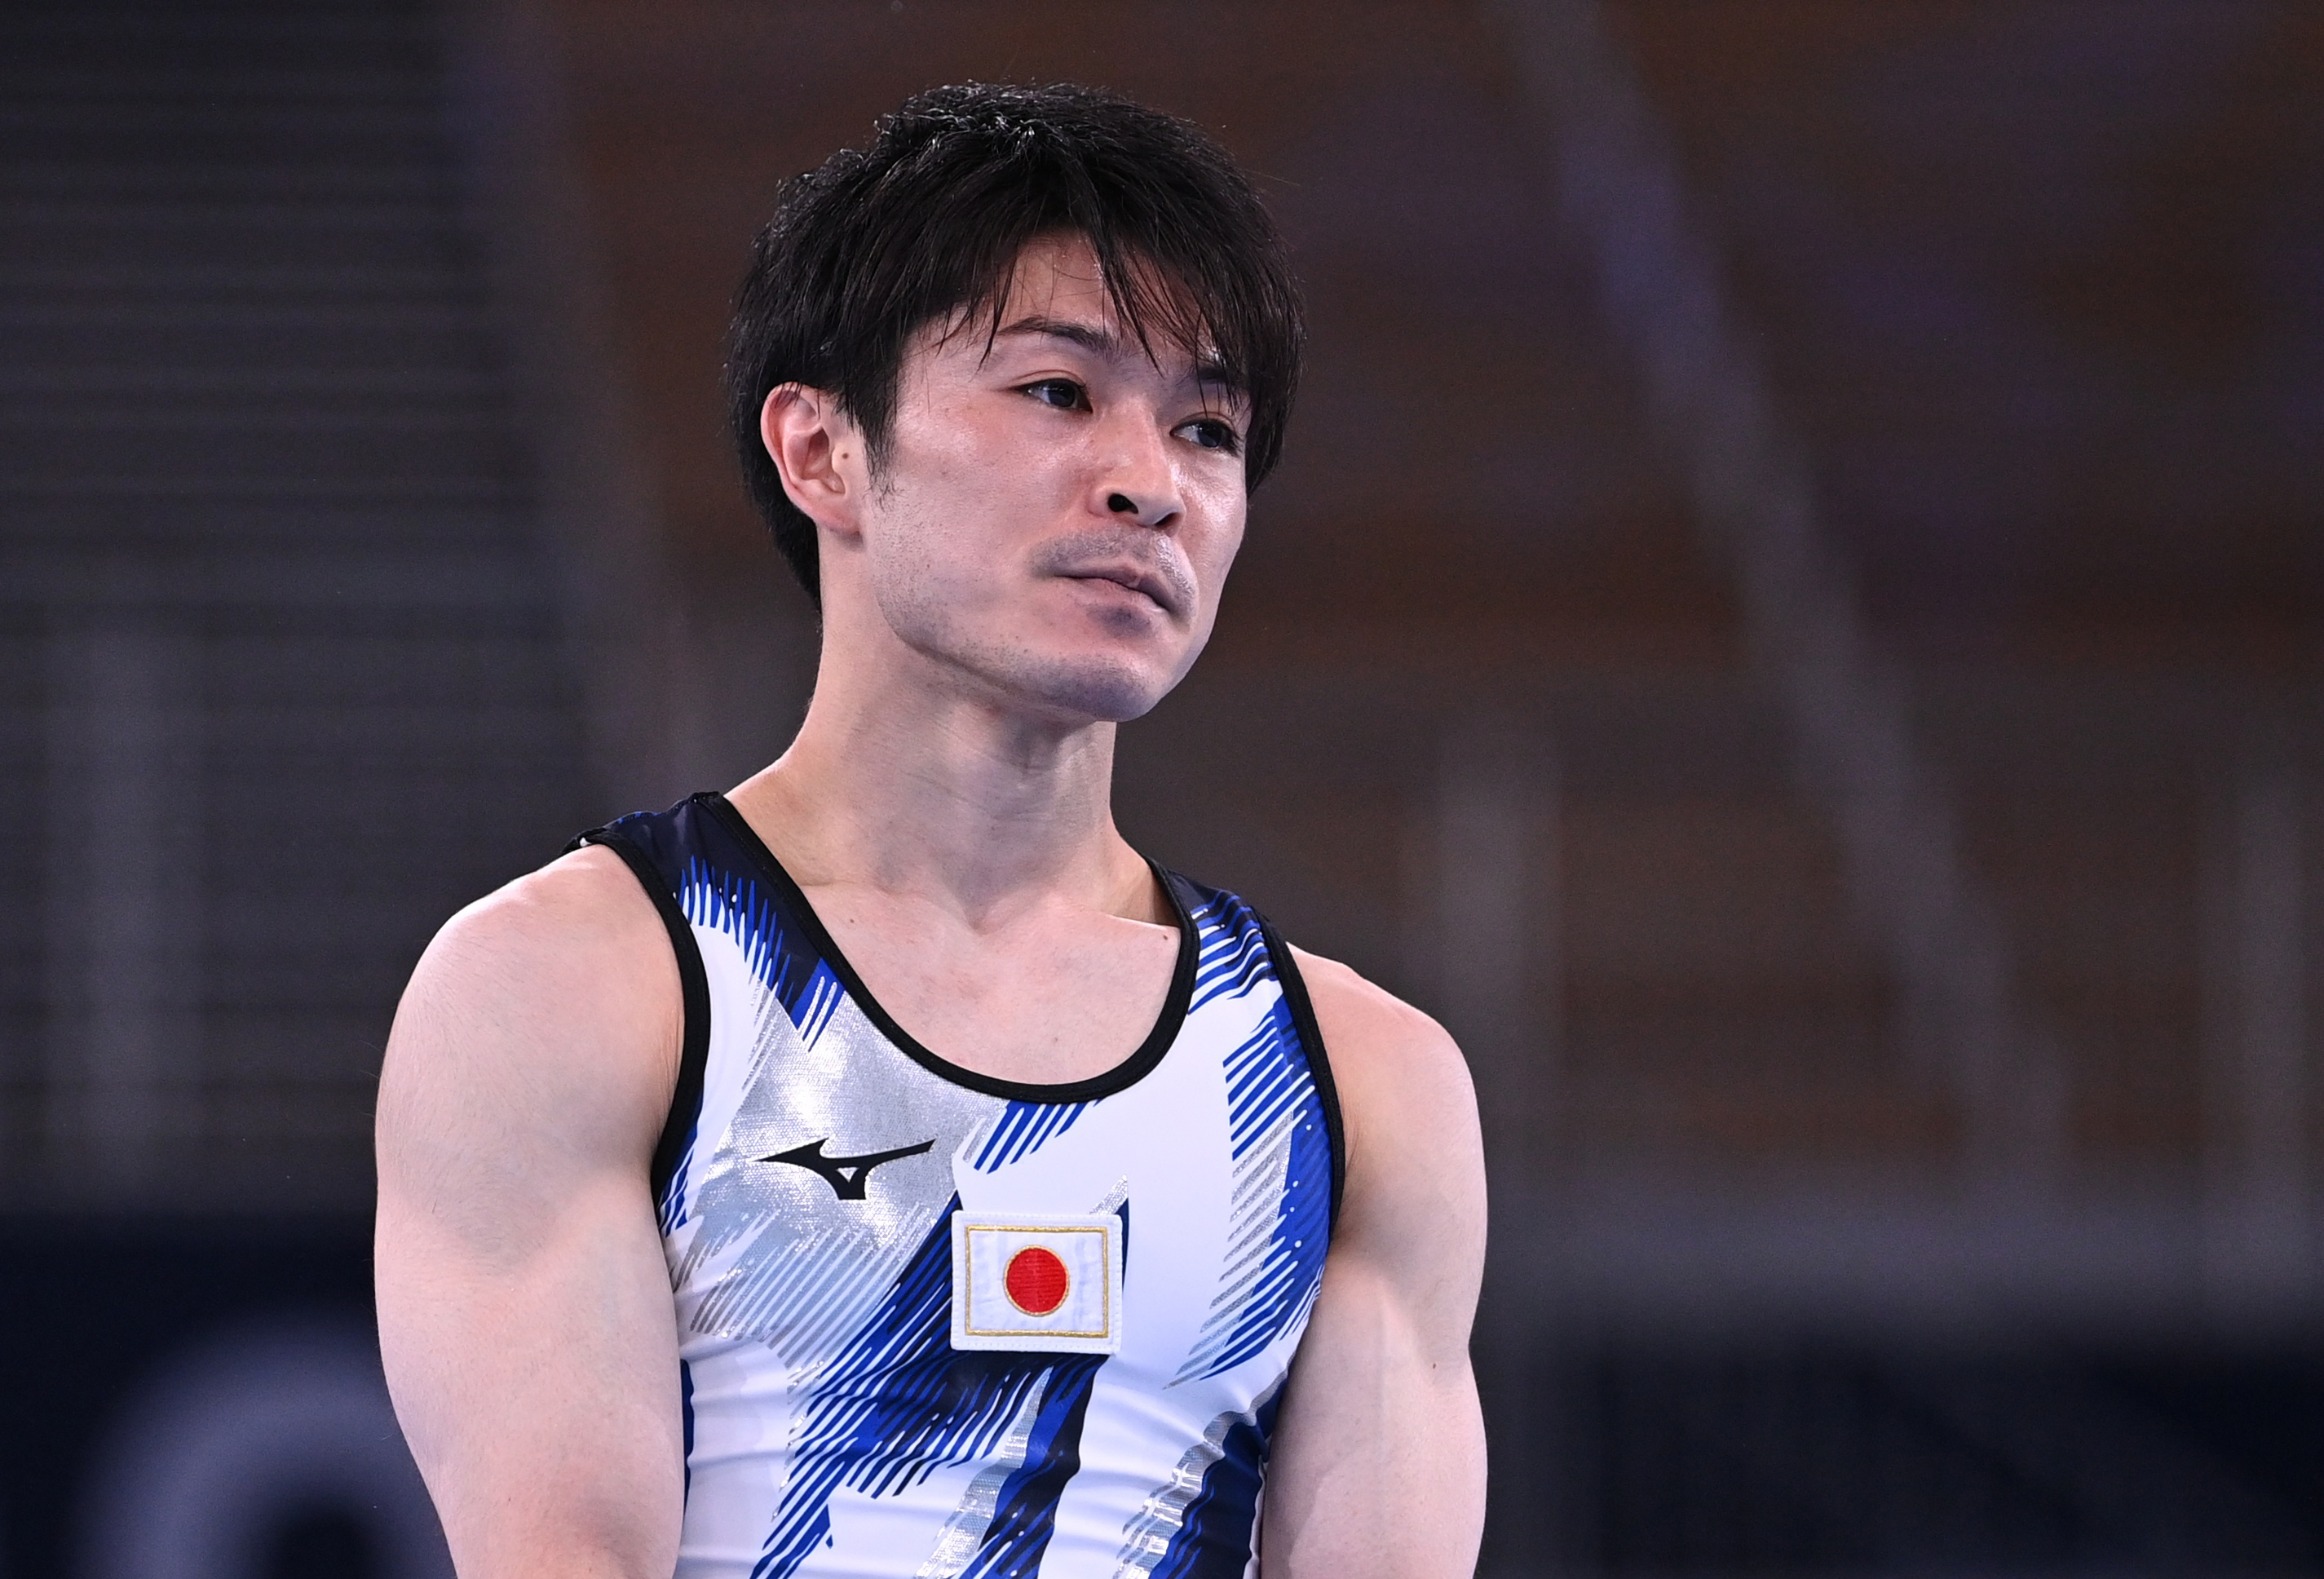 Olympics Gymnastics King Kohei S Reign Comes To End As Japan Moves On Reuters